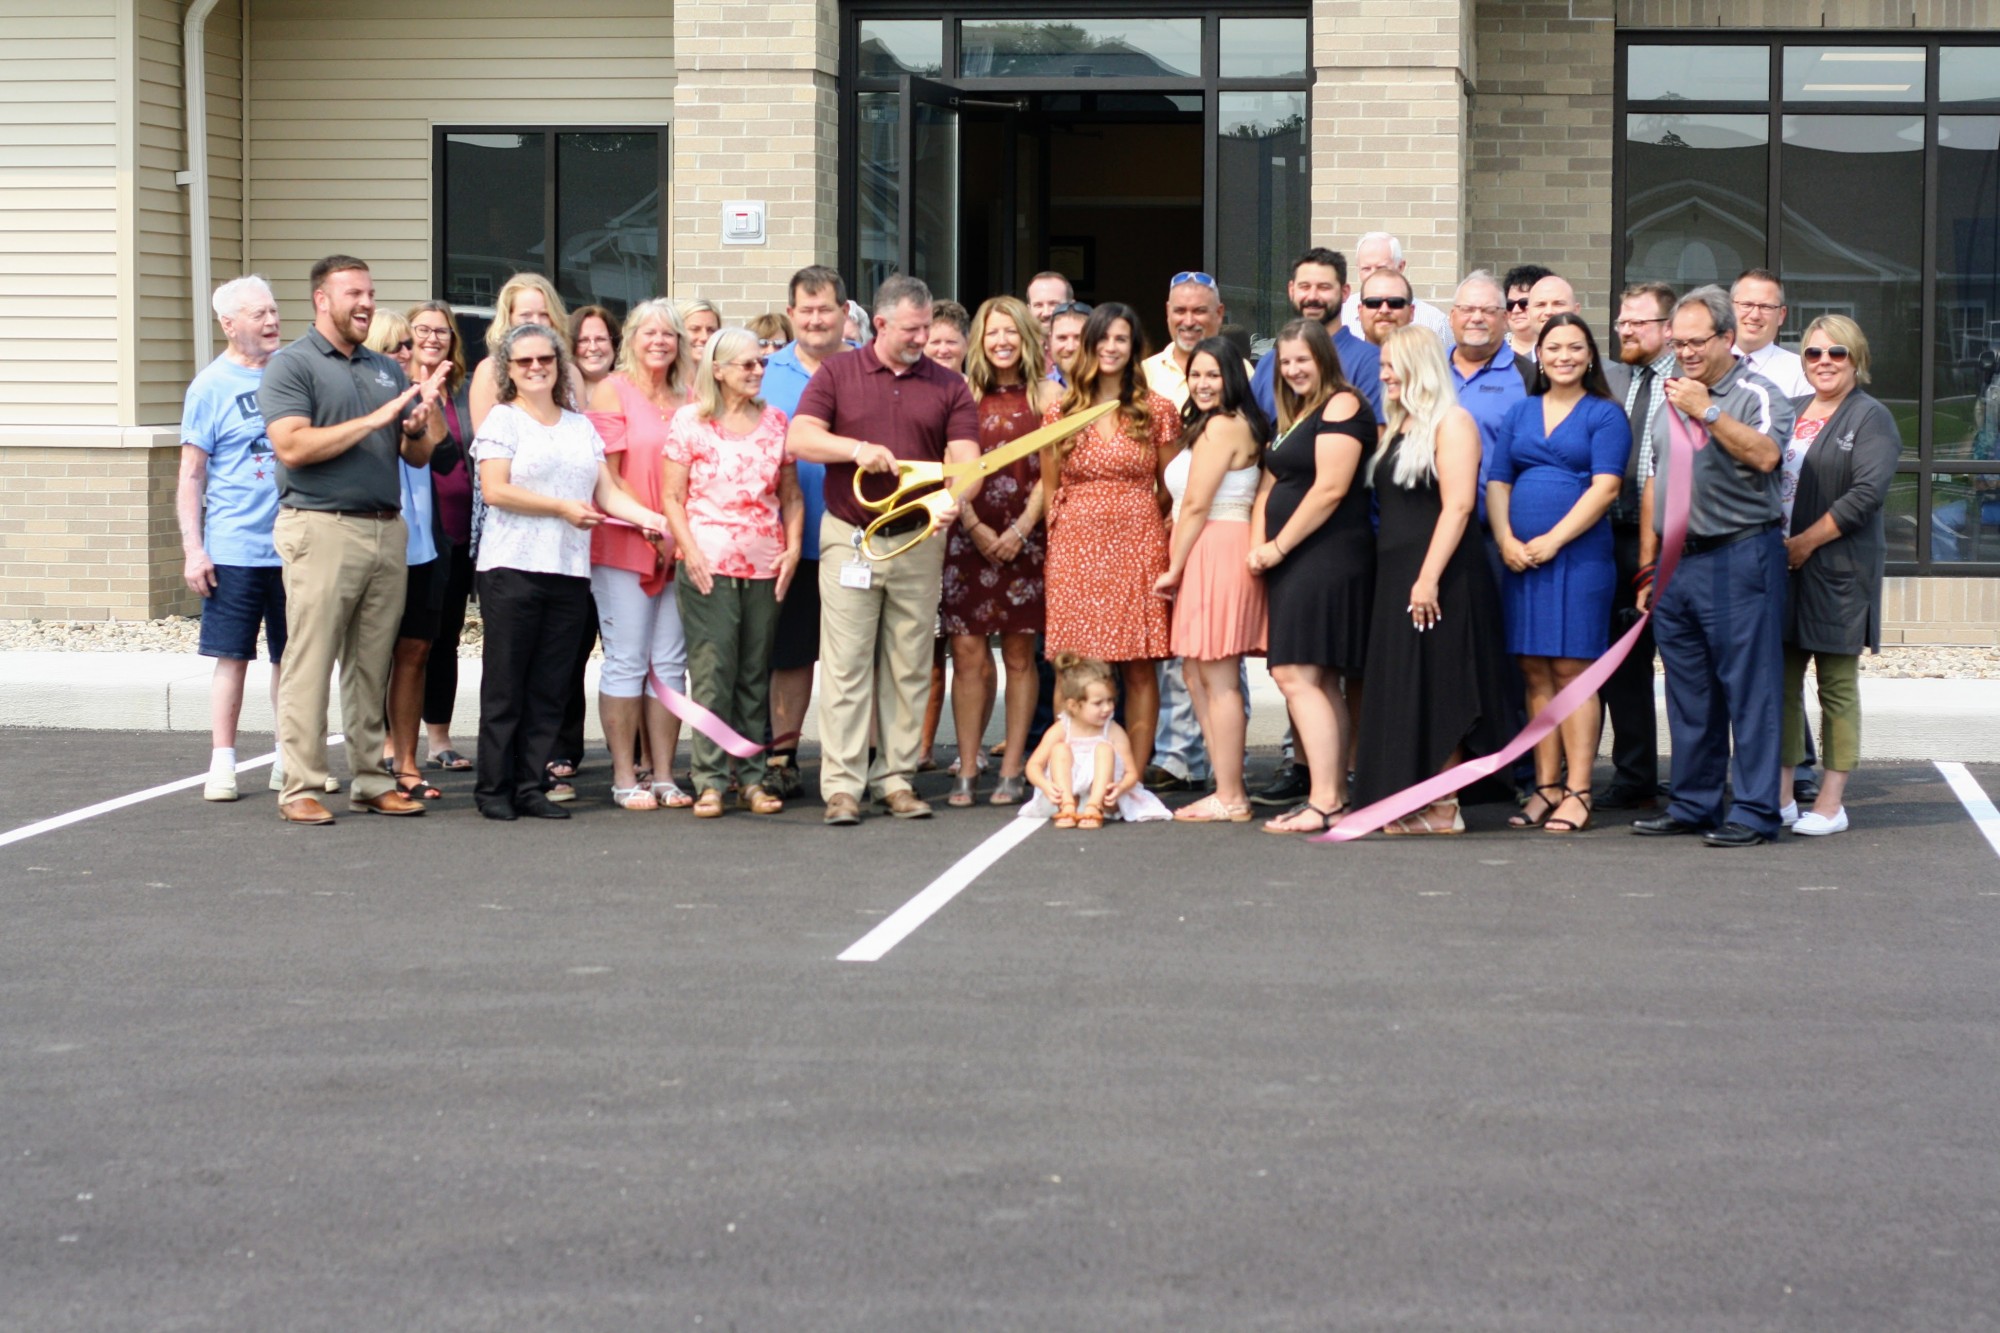 C. D. Sears MD Inc. Celebrates Ribbon Cutting for New Location